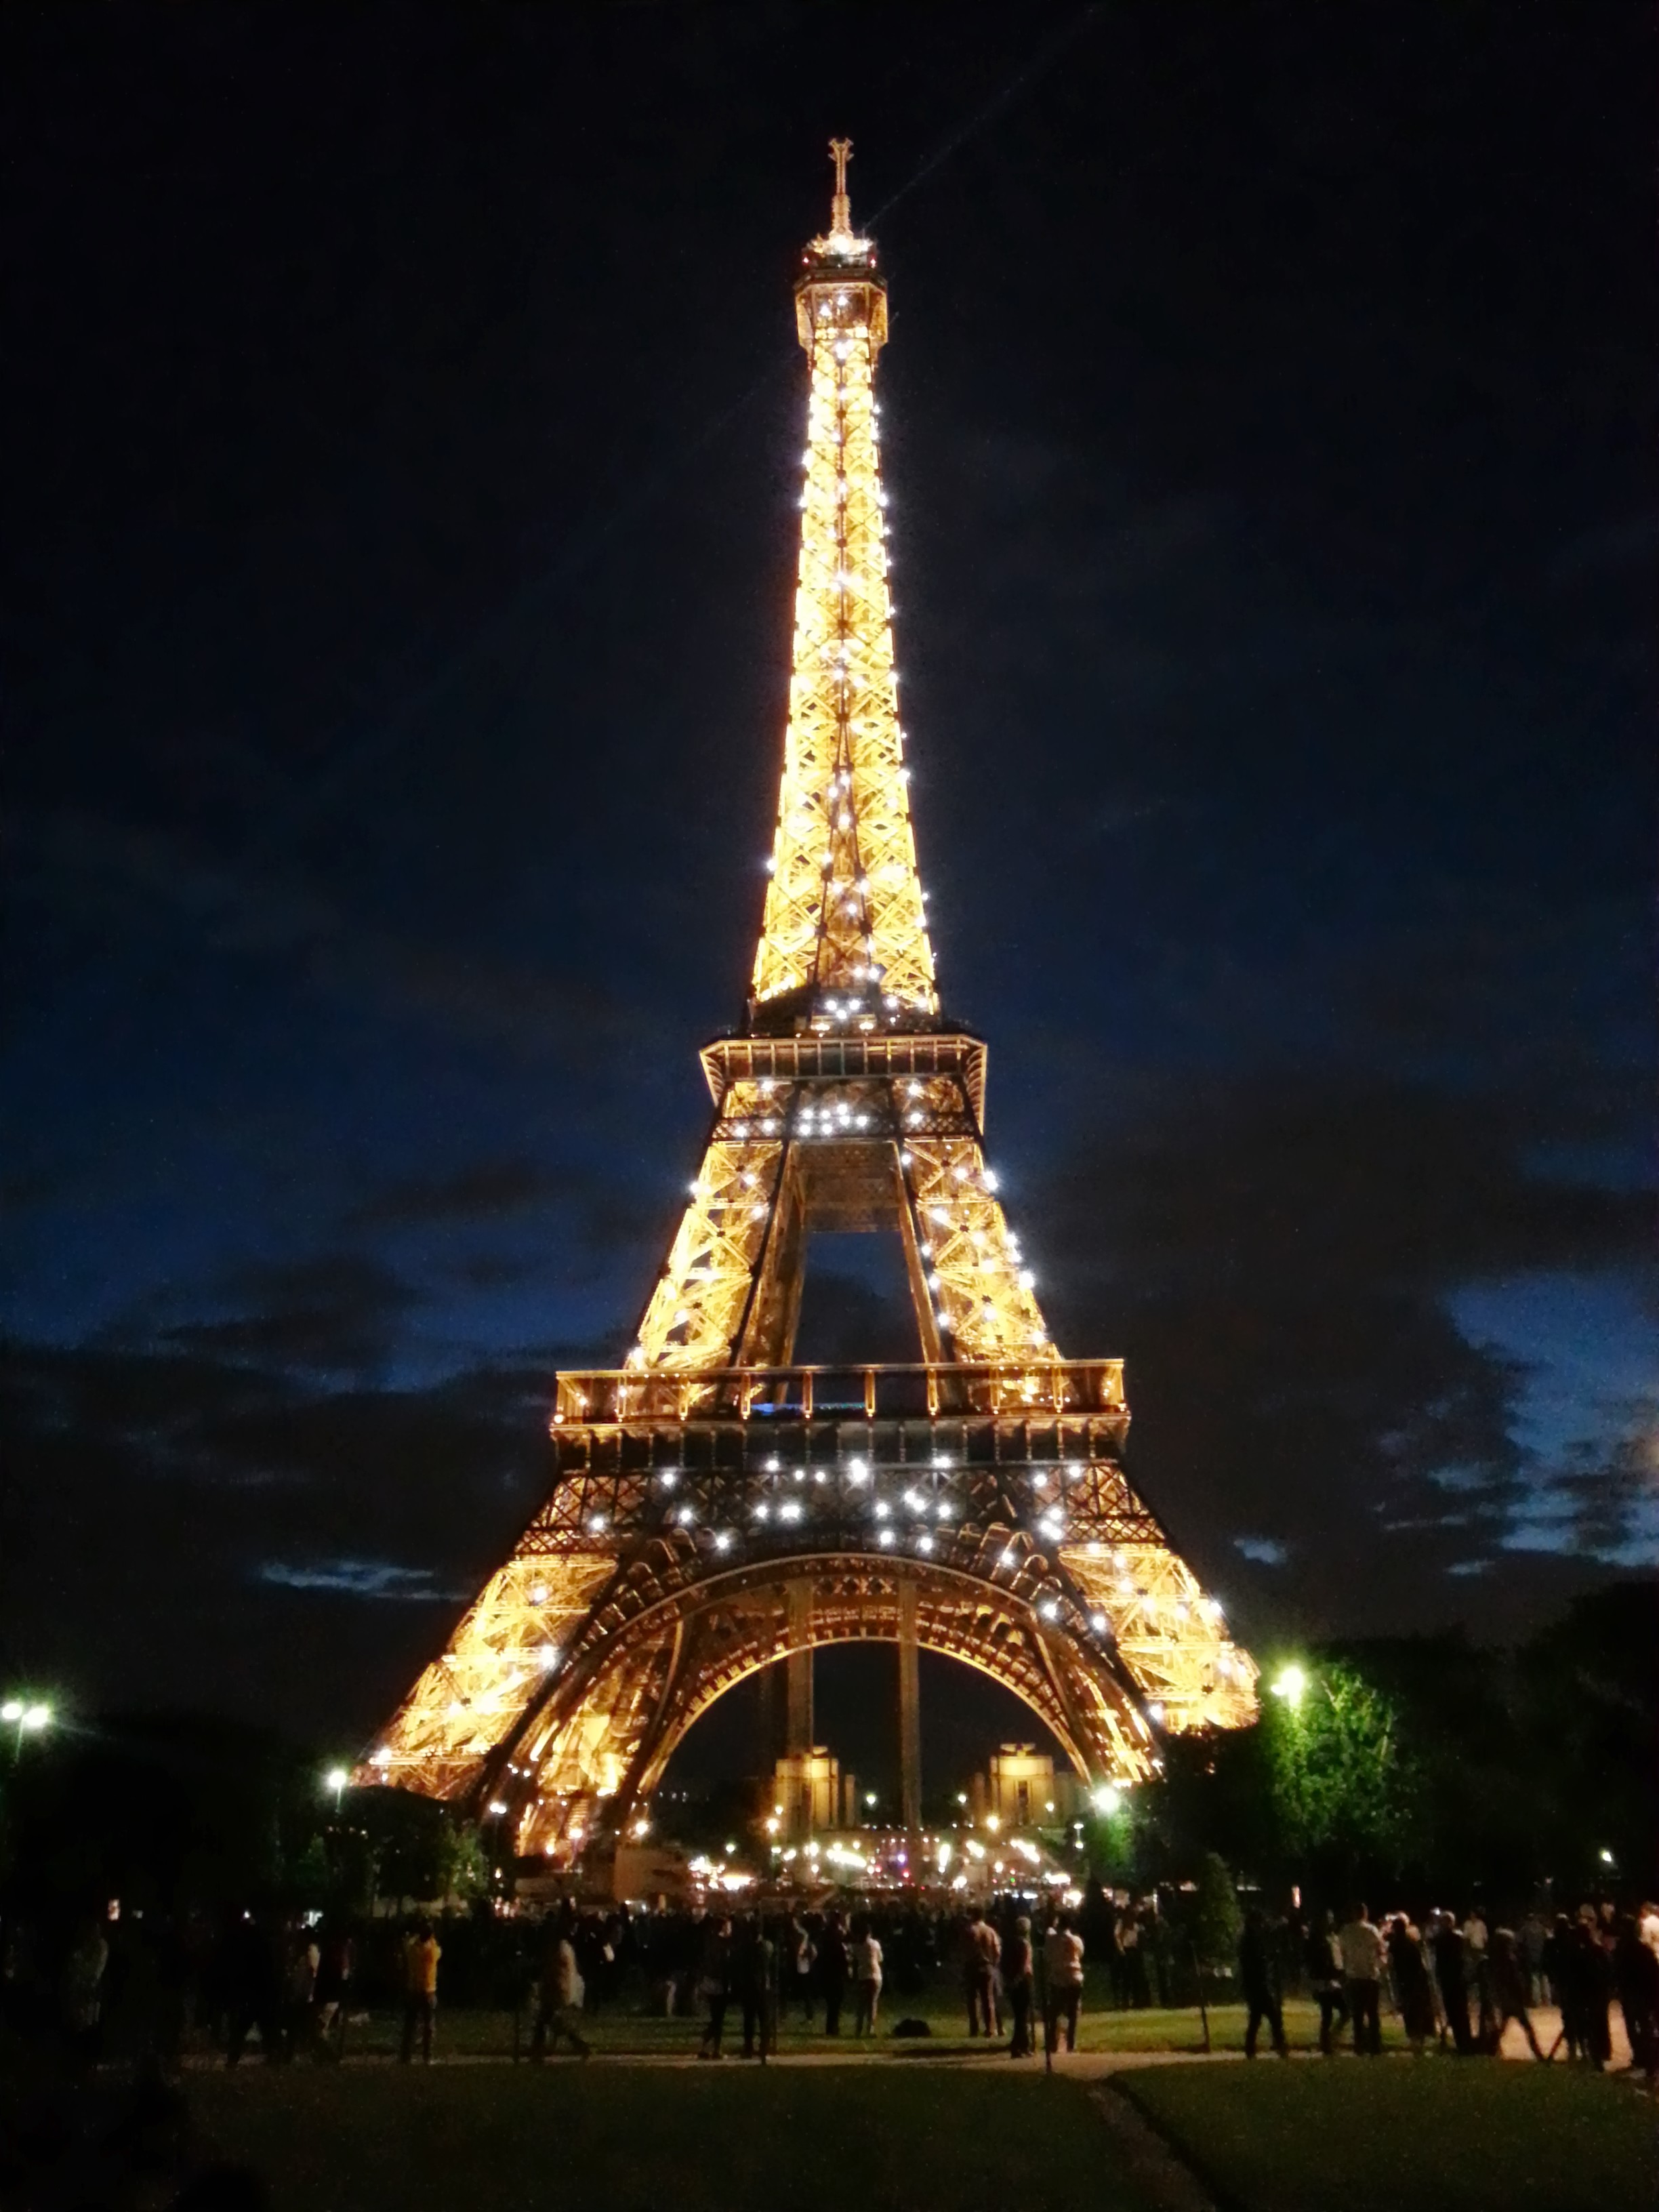 Sparkling Eiffel Tower at night from distance